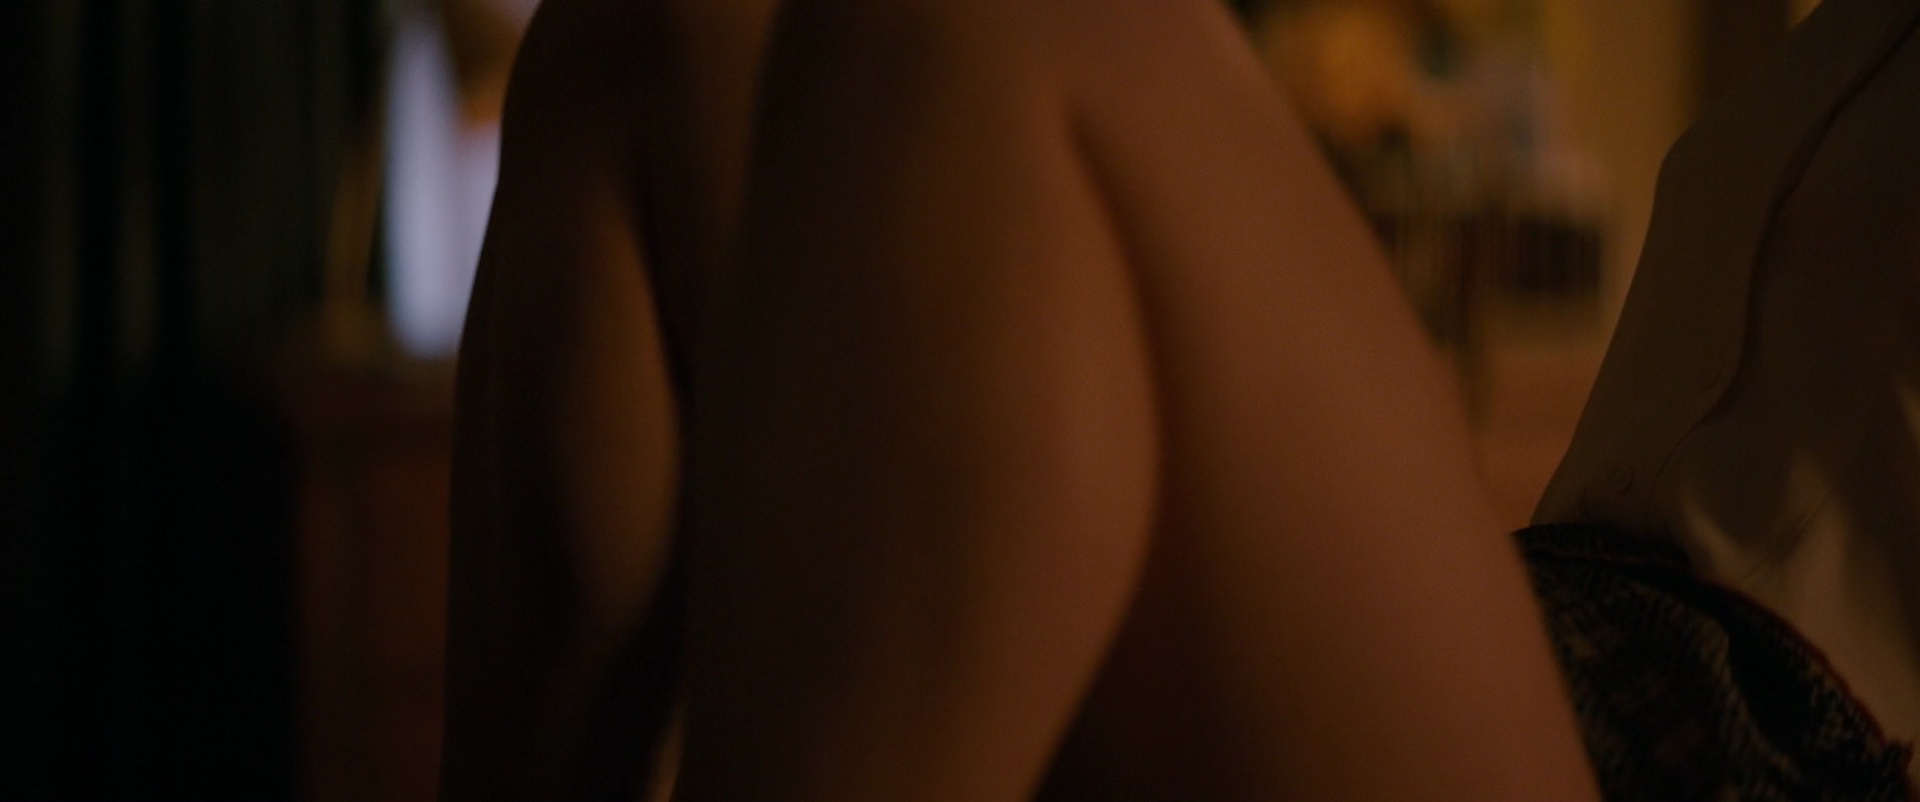 Valorie Curry nude pics.